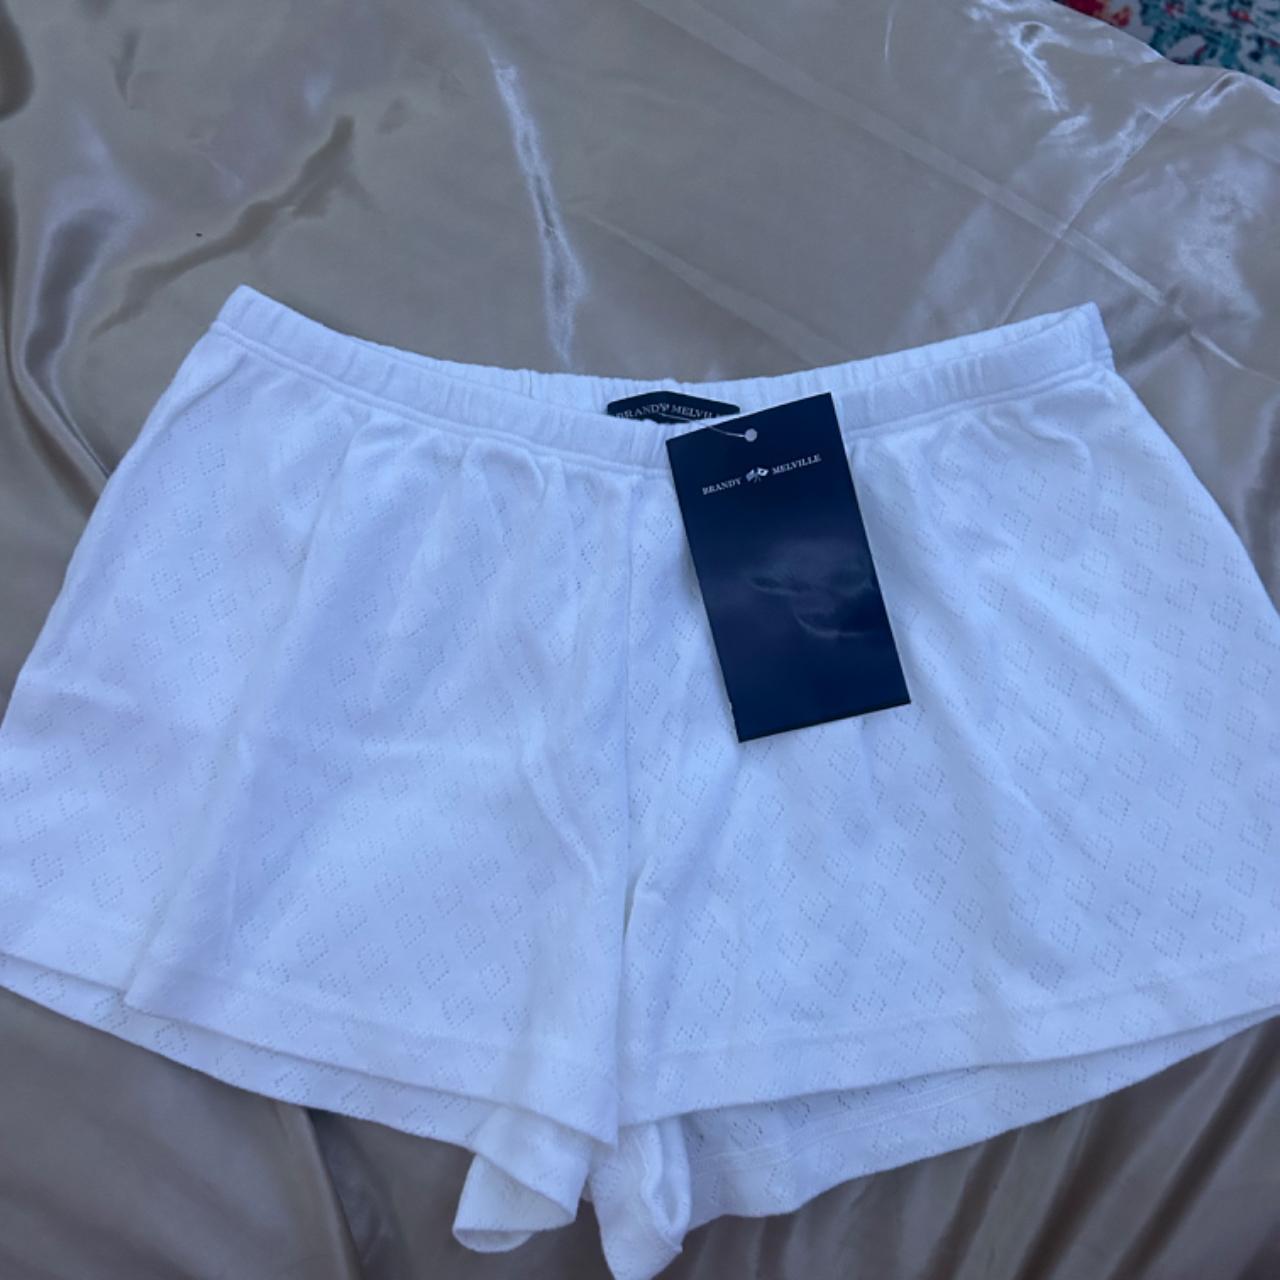 Brandy Melville white with blue heart shorts - Depop